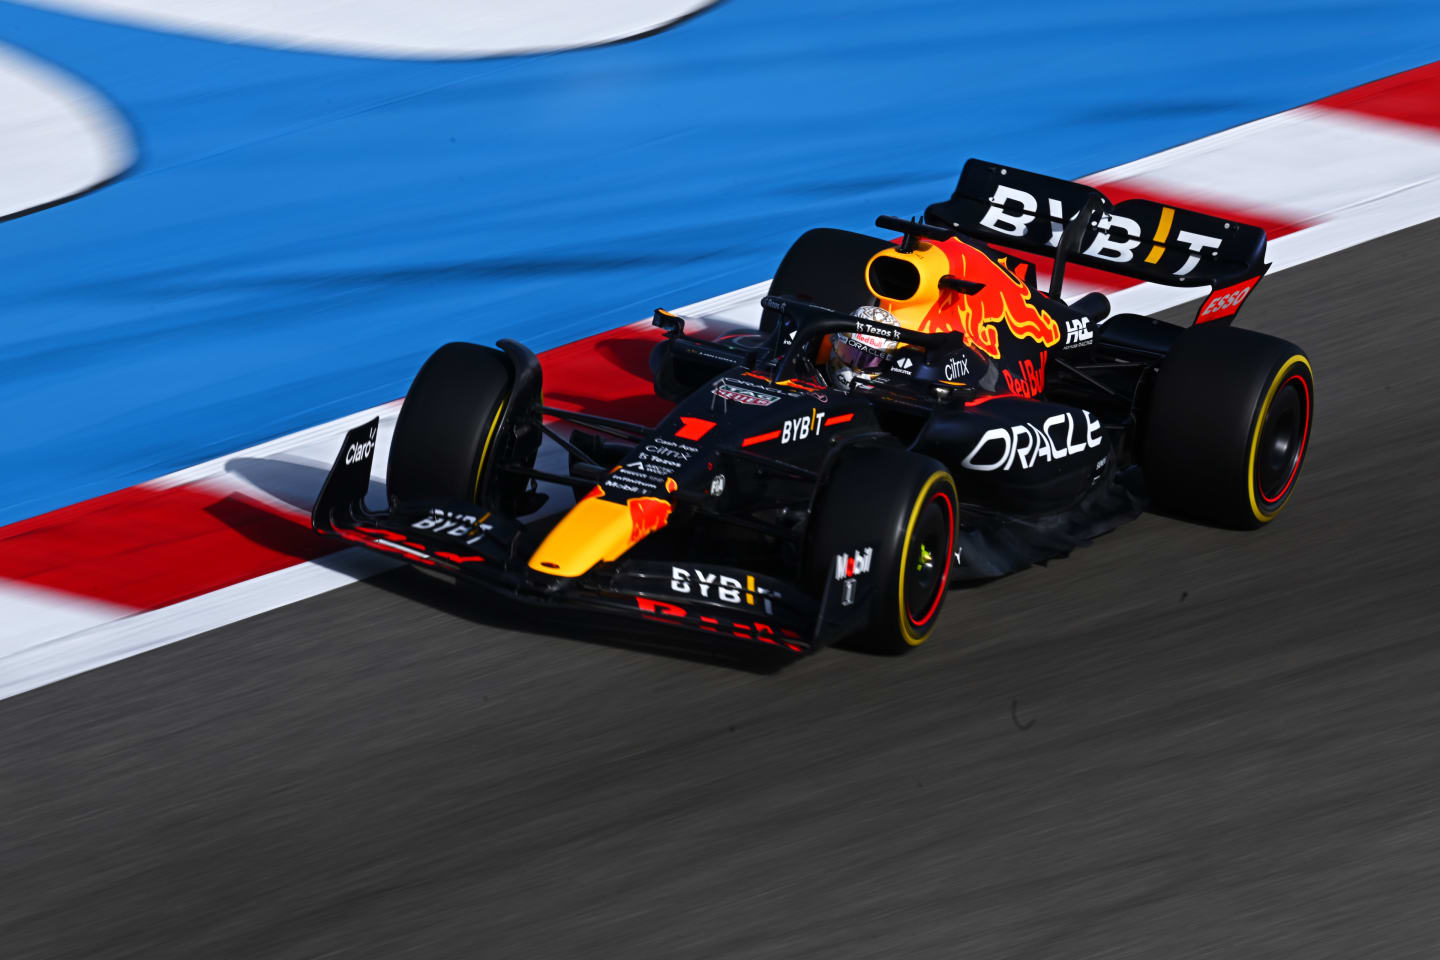 BAHRAIN, BAHRAIN - MARCH 18: Max Verstappen of the Netherlands driving the (1) Oracle Red Bull Racing RB18 on track during practice ahead of the F1 Grand Prix of Bahrain at Bahrain International Circuit on March 18, 2022 in Bahrain, Bahrain. (Photo by Clive Mason/Getty Images)